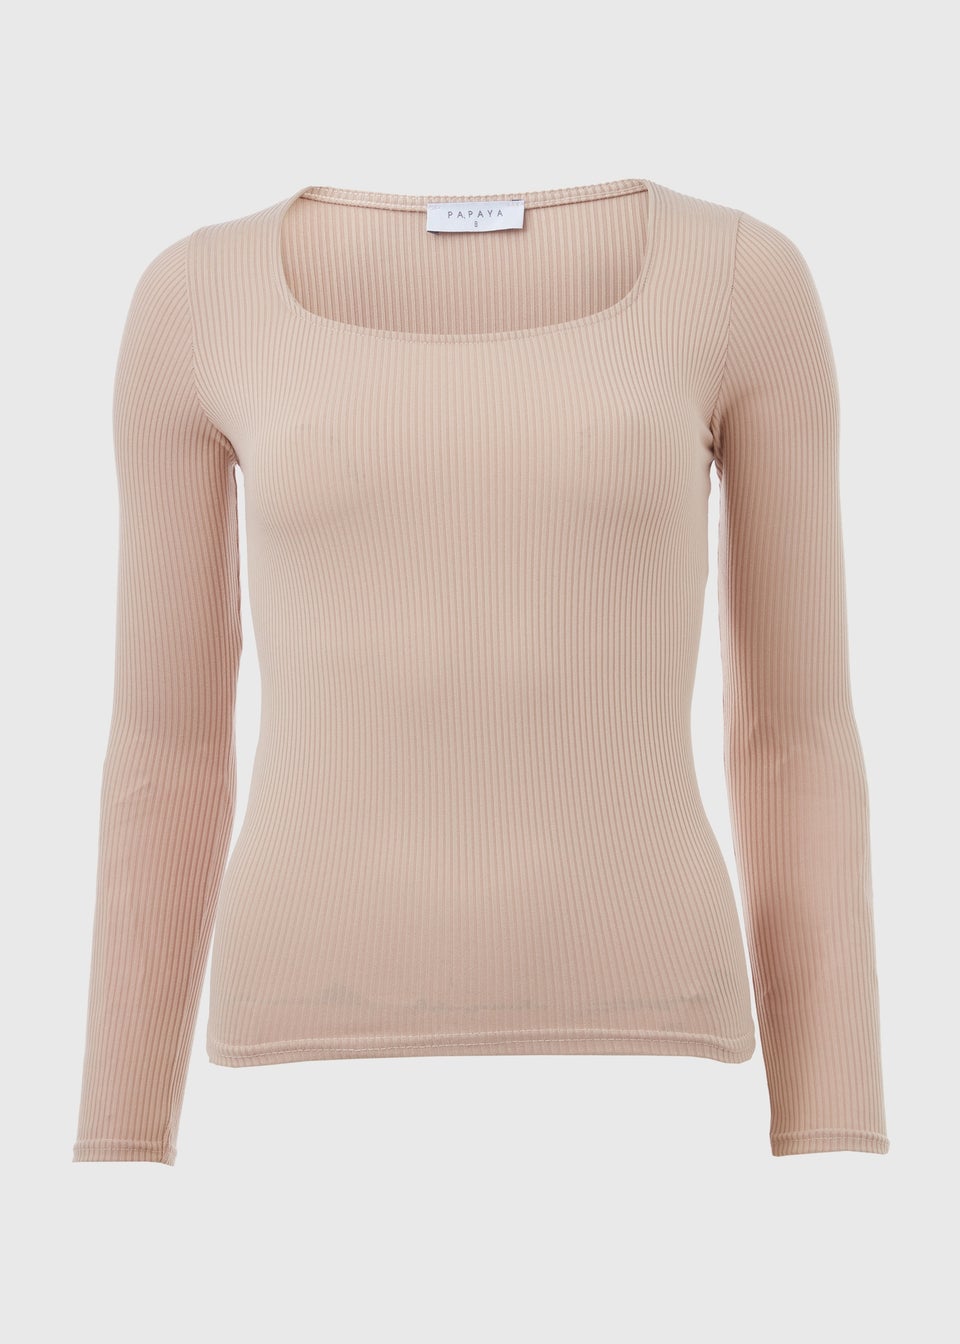 Stone Square Neck Ribbed Top